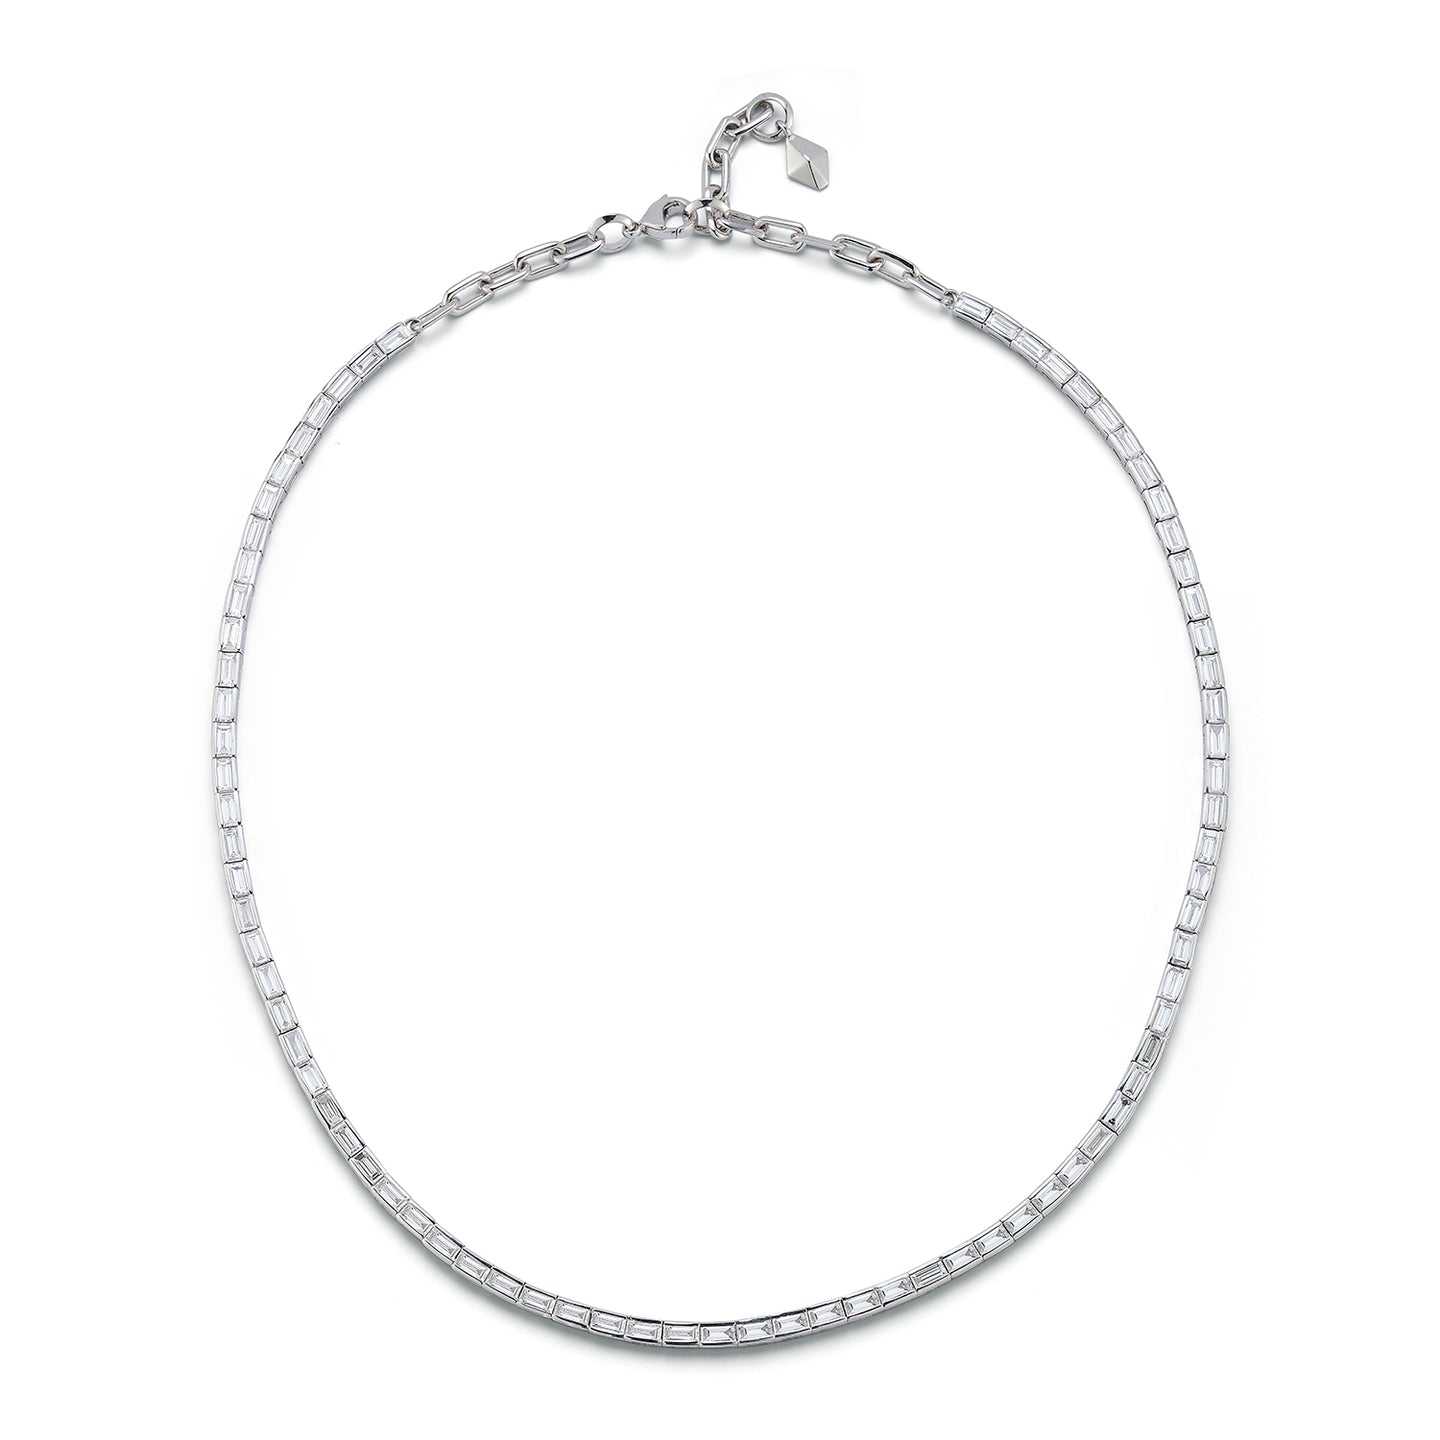 WF CLASSIC 18K WHITE GOLD AND BAGUETTE DIAMOND TENNIS NECKLACE